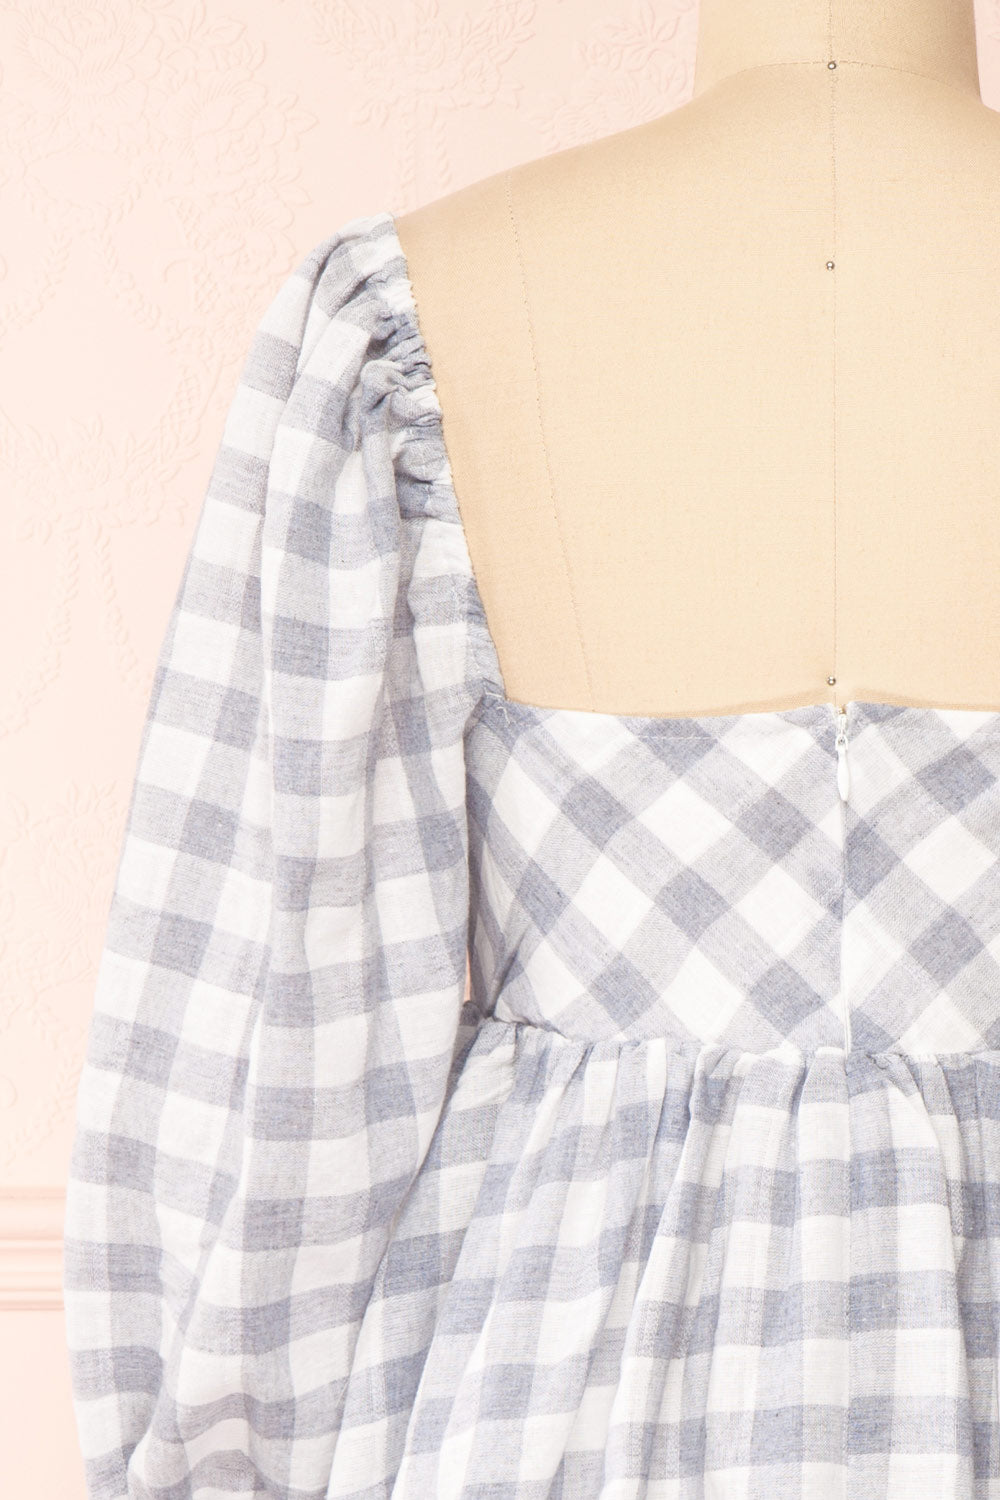 Conie Blue | Puffed Sleeves Short Checkered Dress back close-up